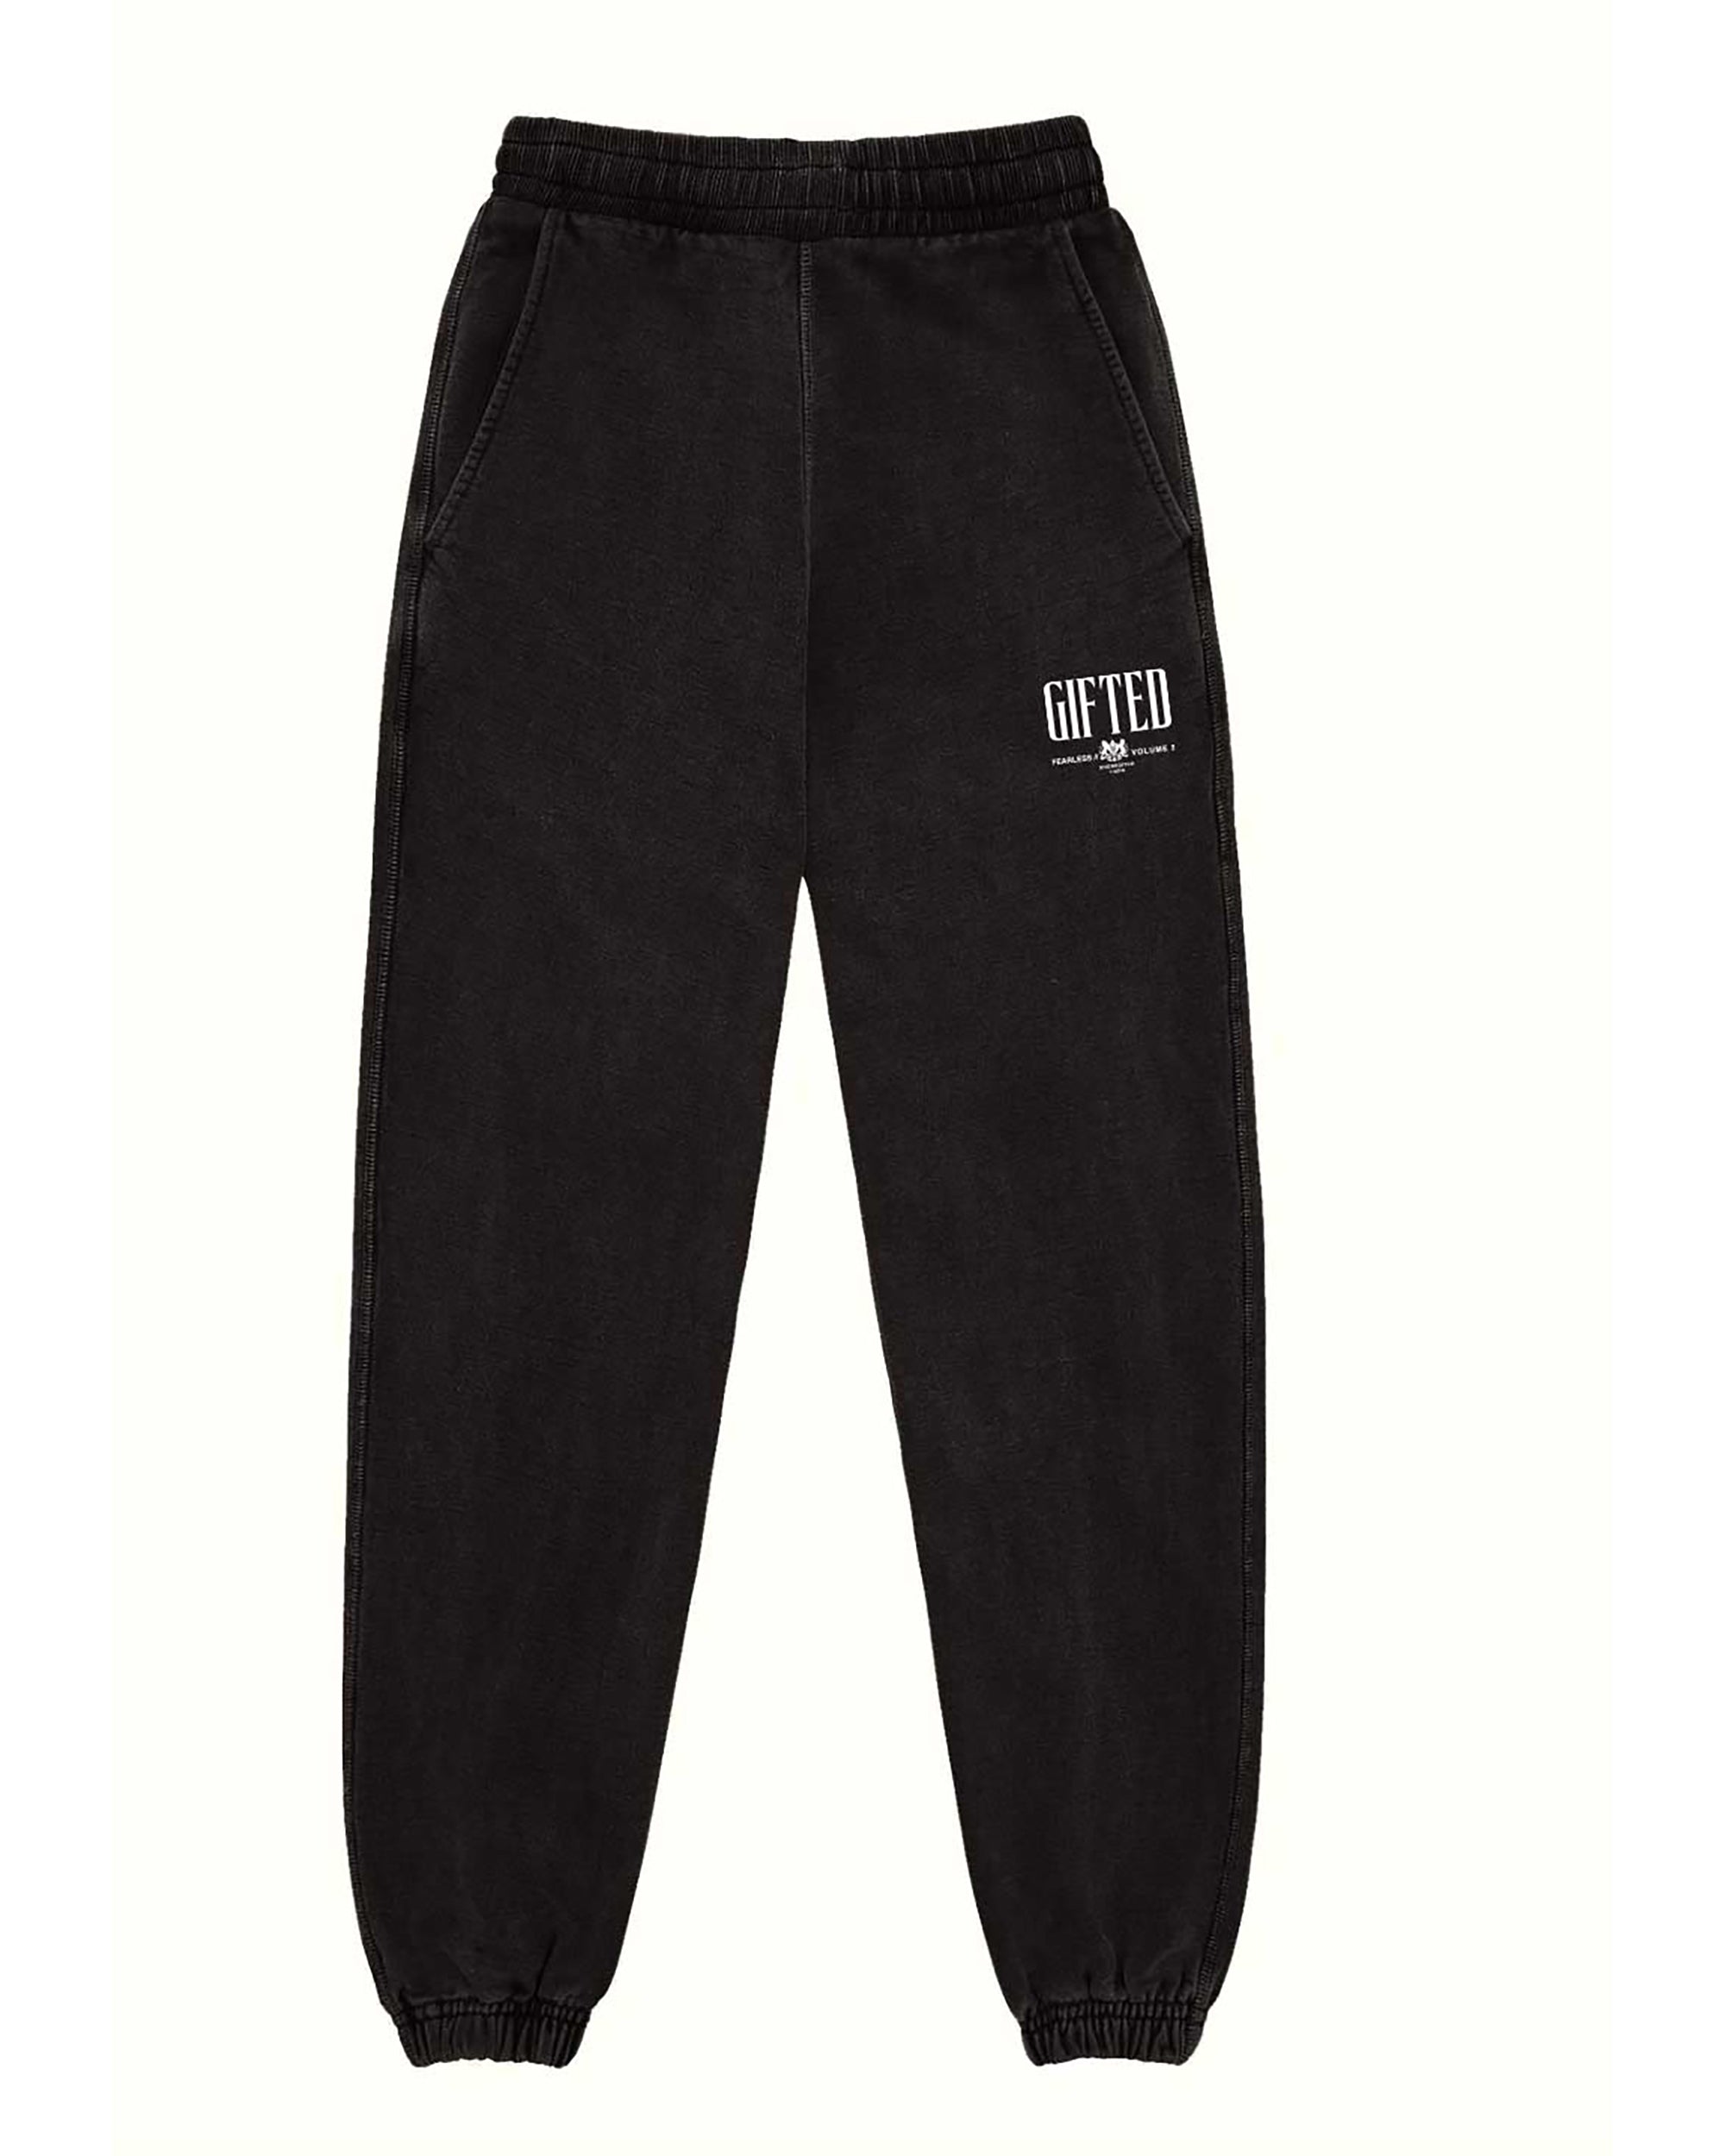 Gifted Joggers - Washed Black